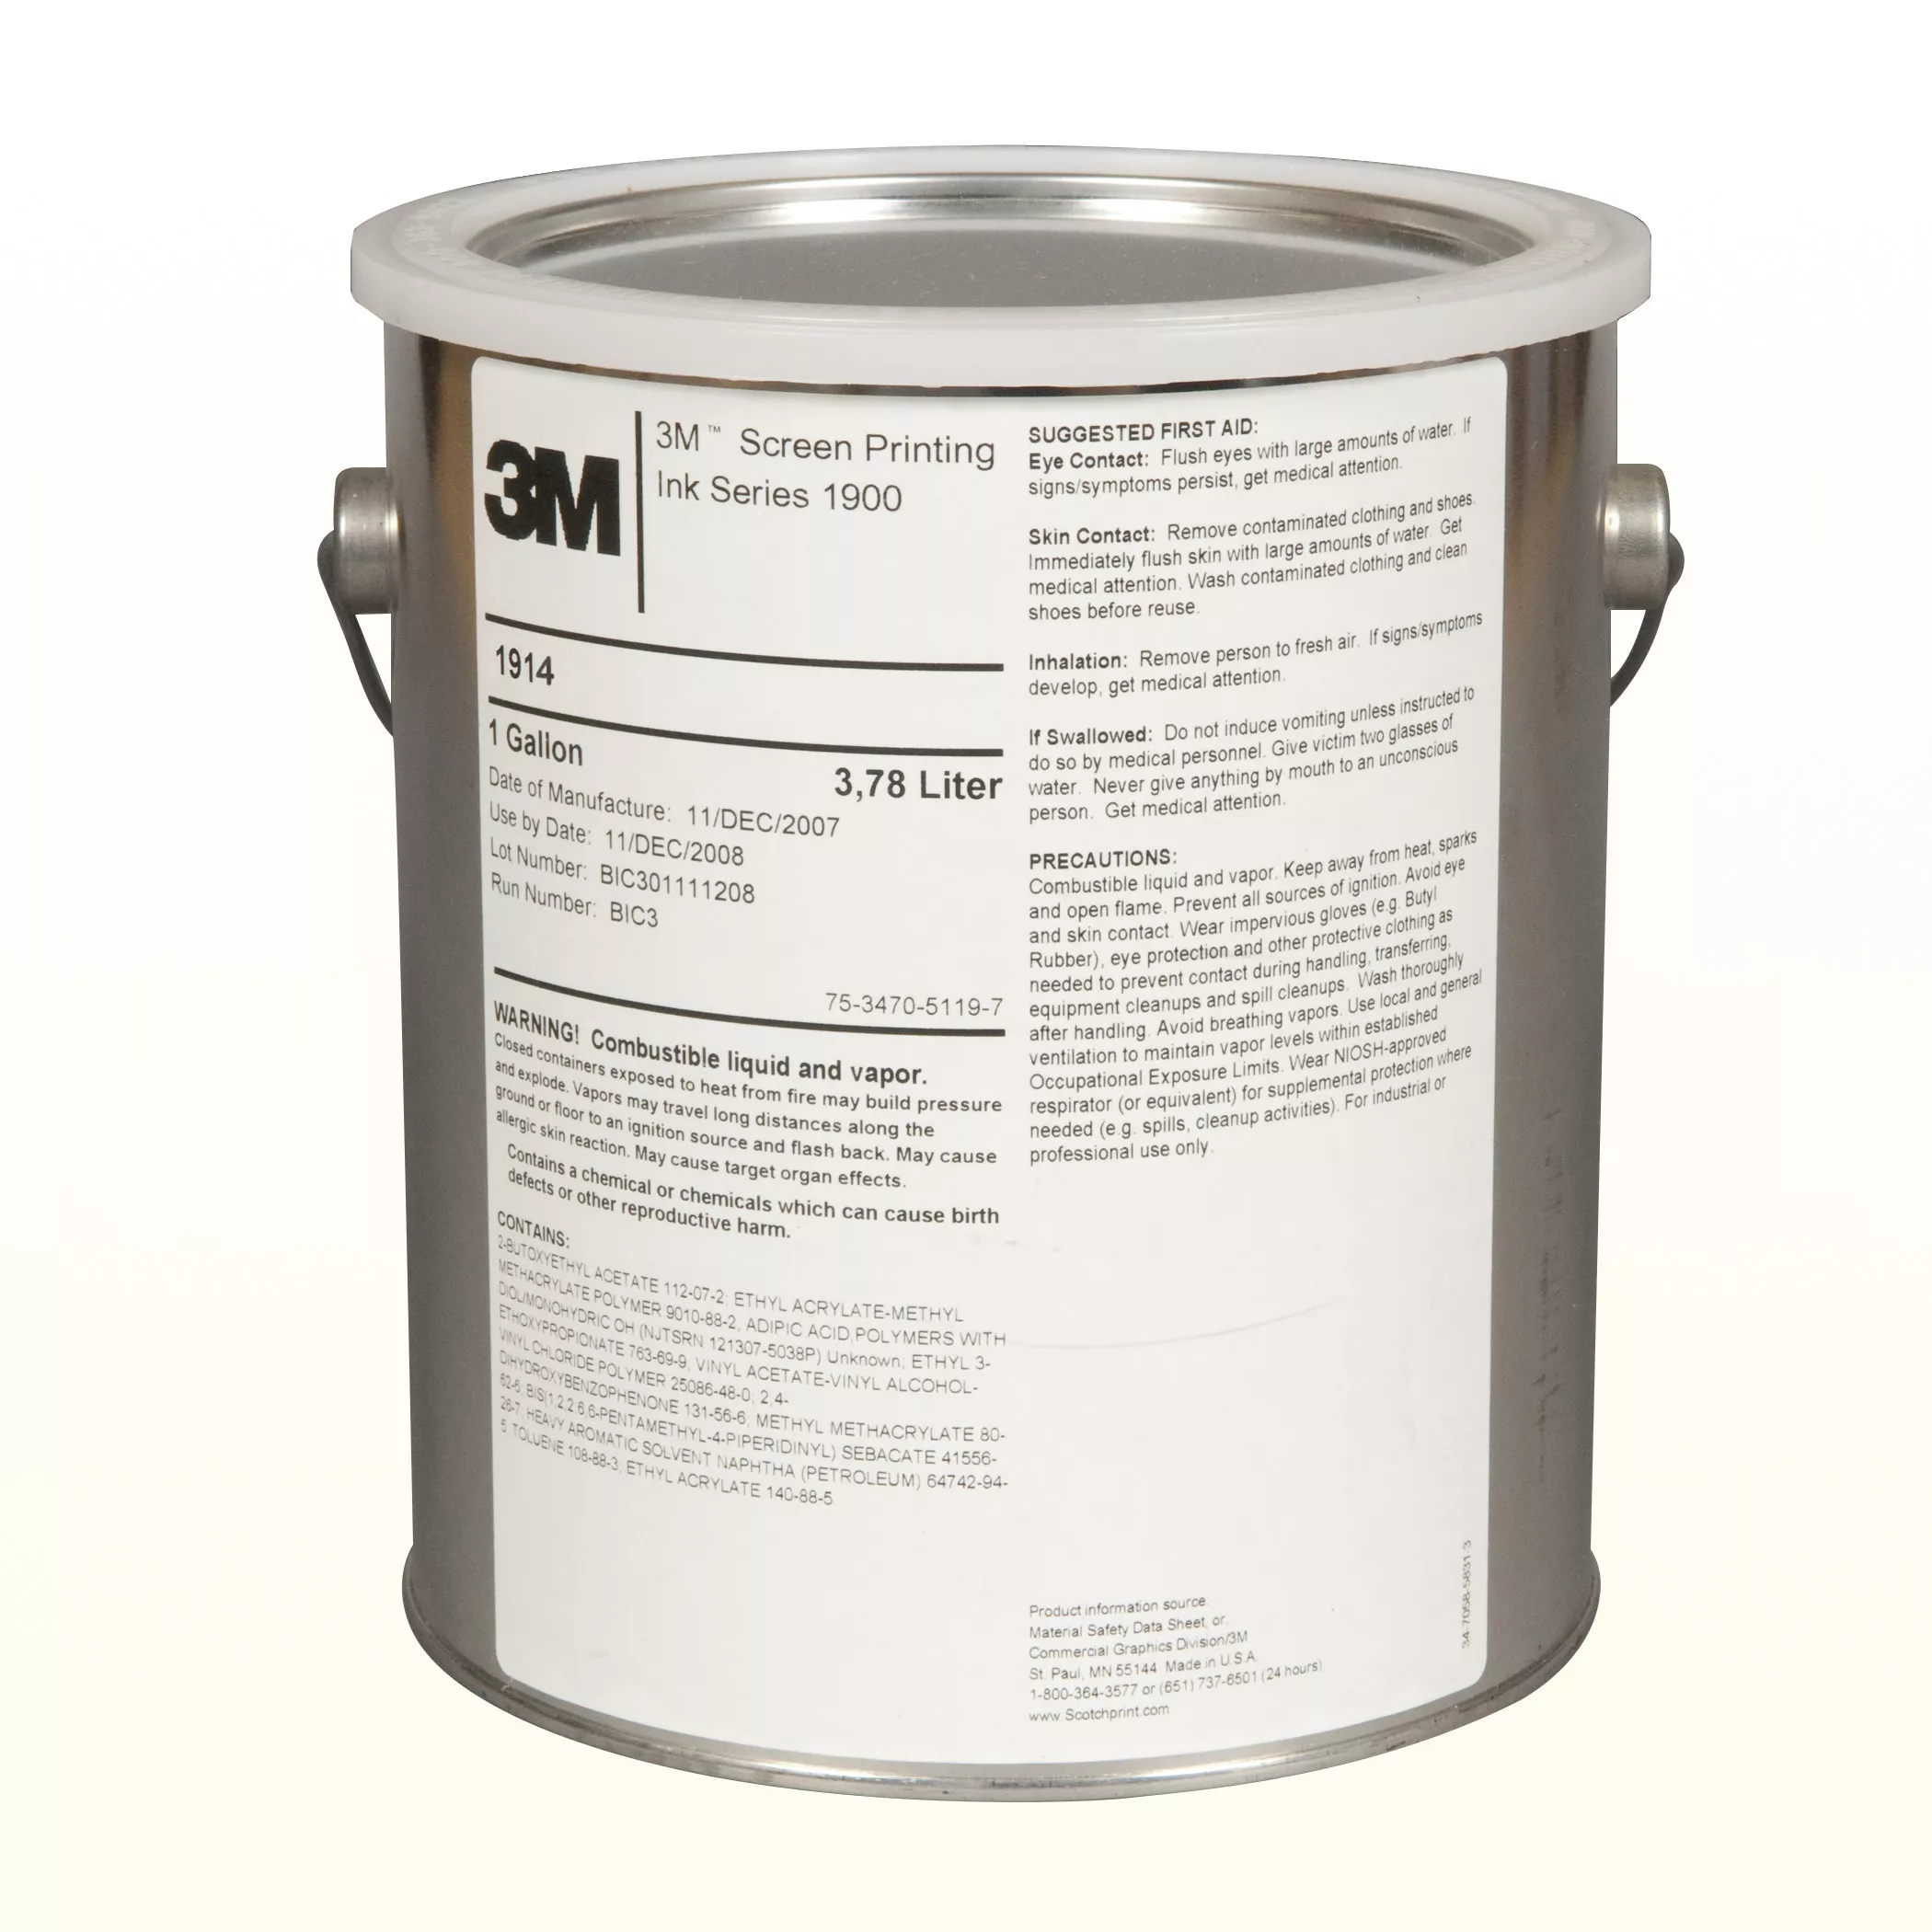 3M™ Screen Printing Ink 1914, Dark Green, 1 Gallon Container